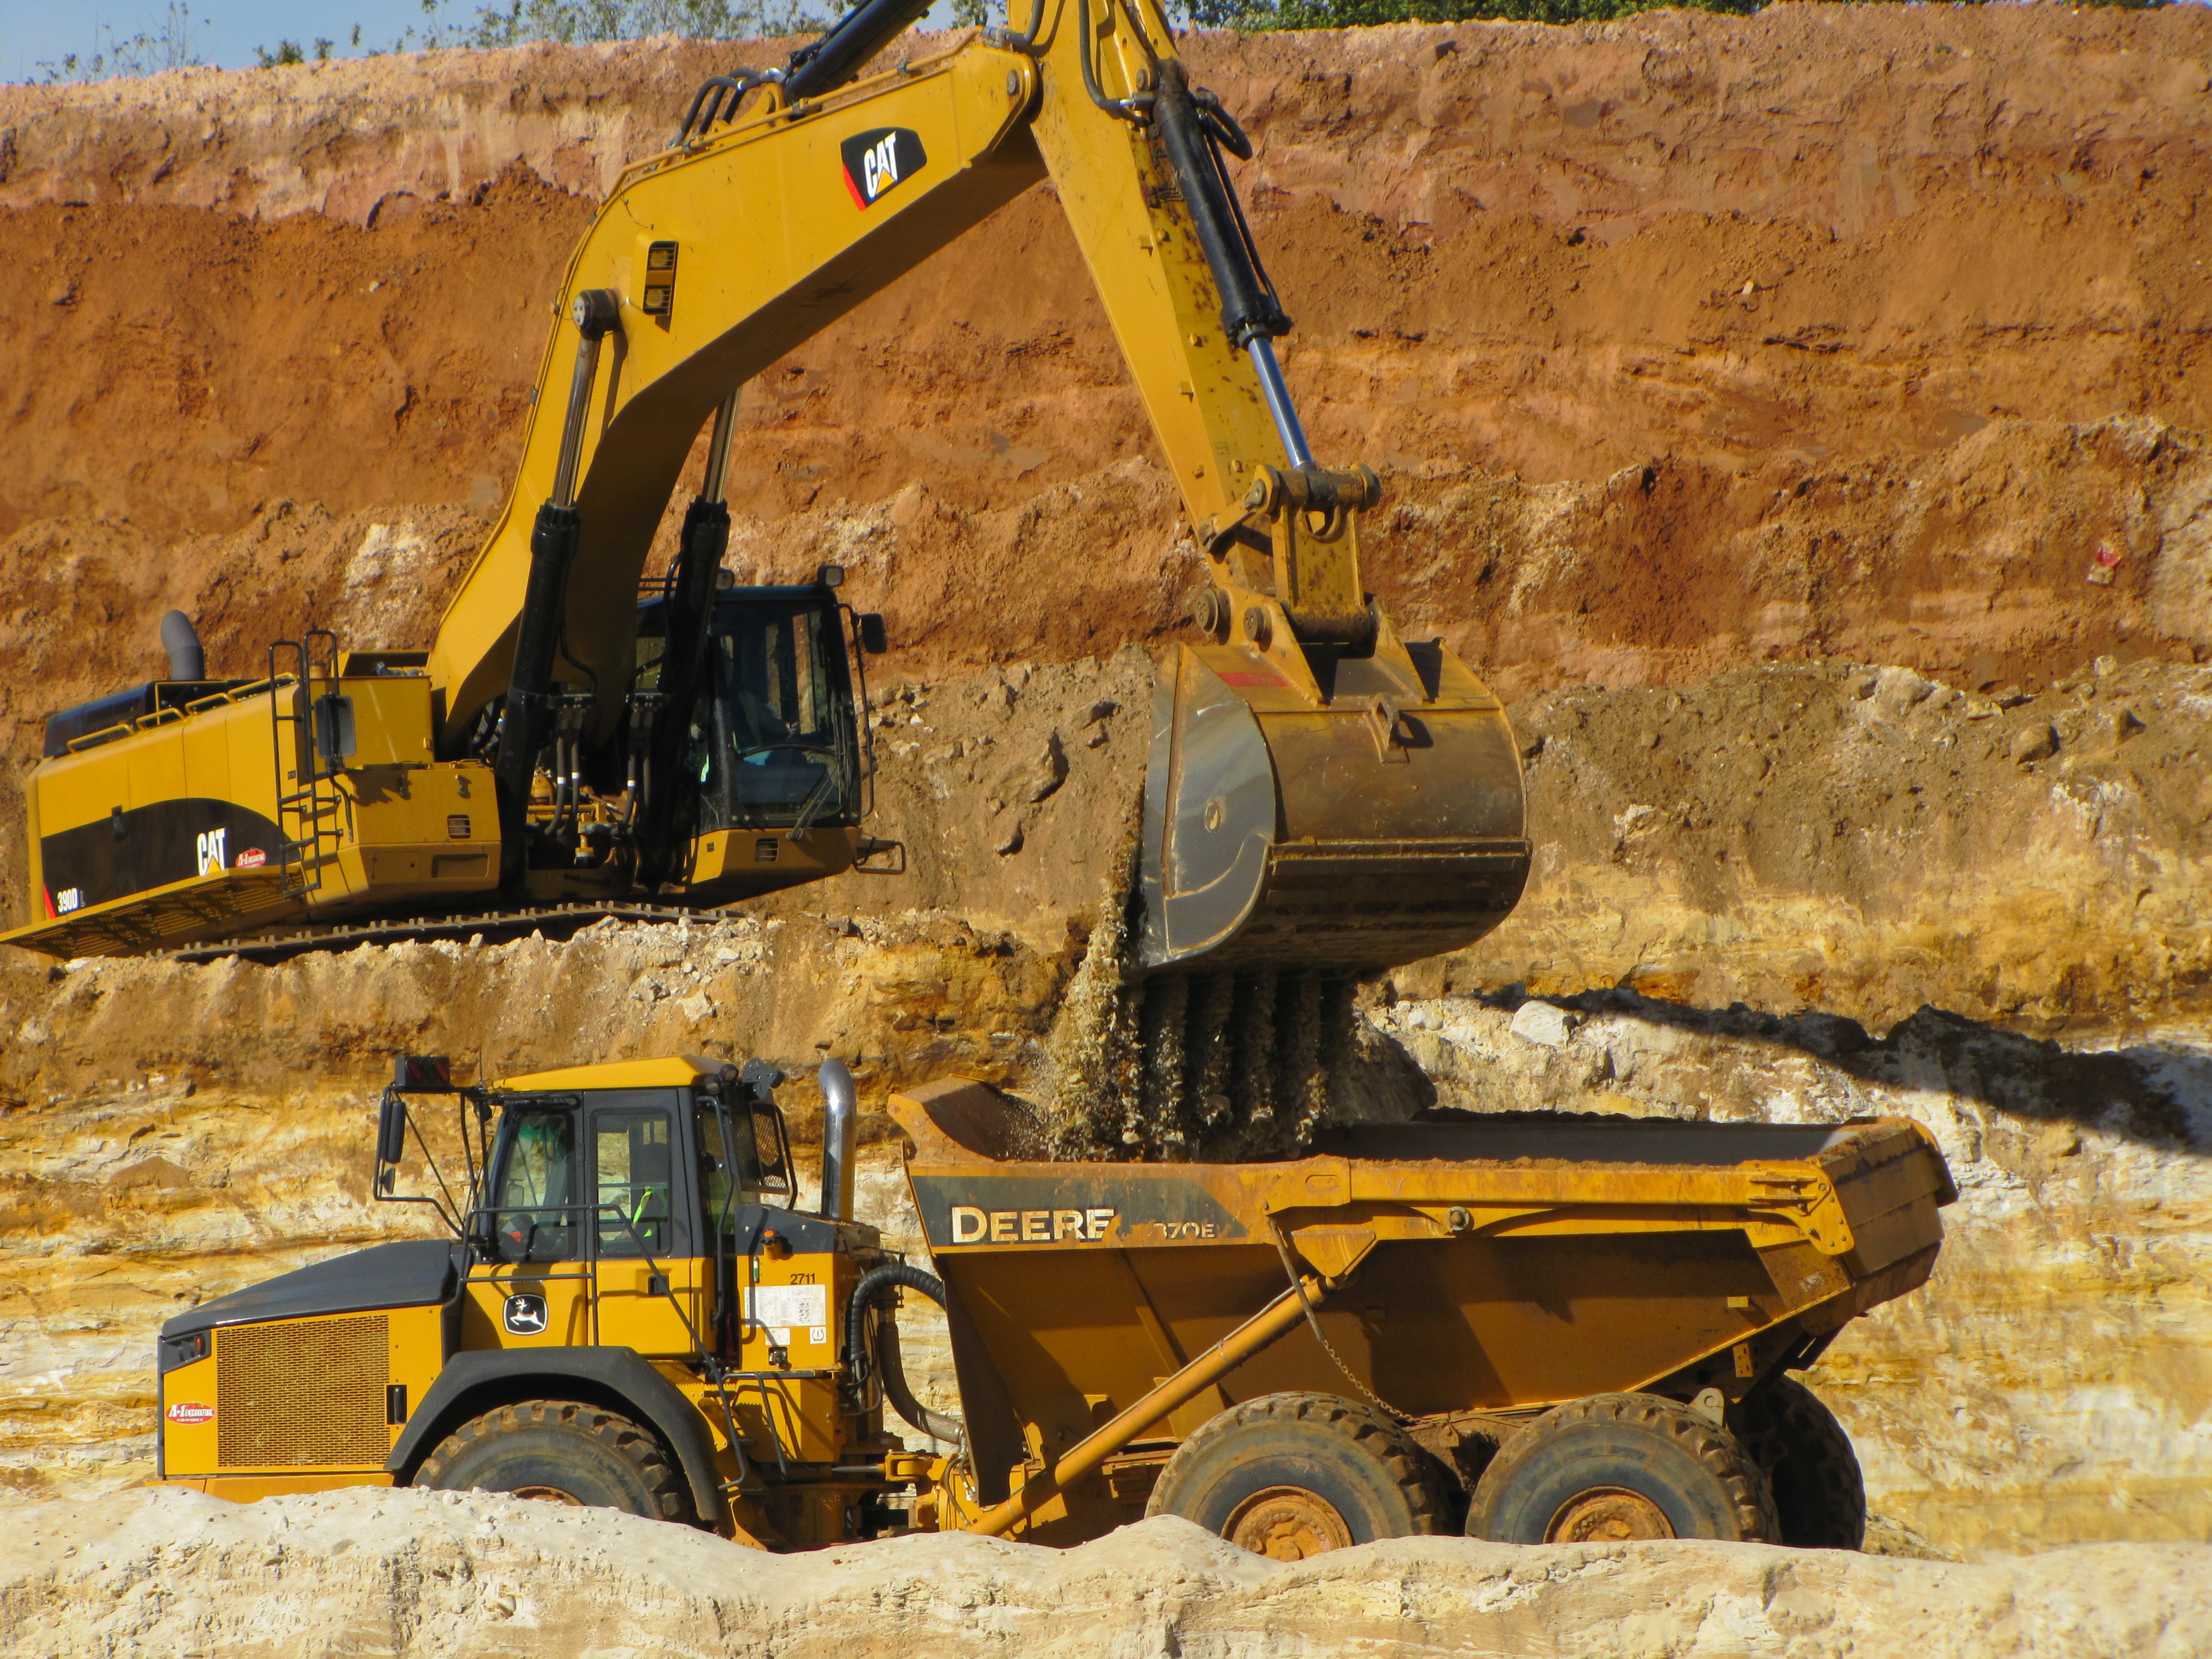 Sifting Through Sand Mining - FracTracker Alliance